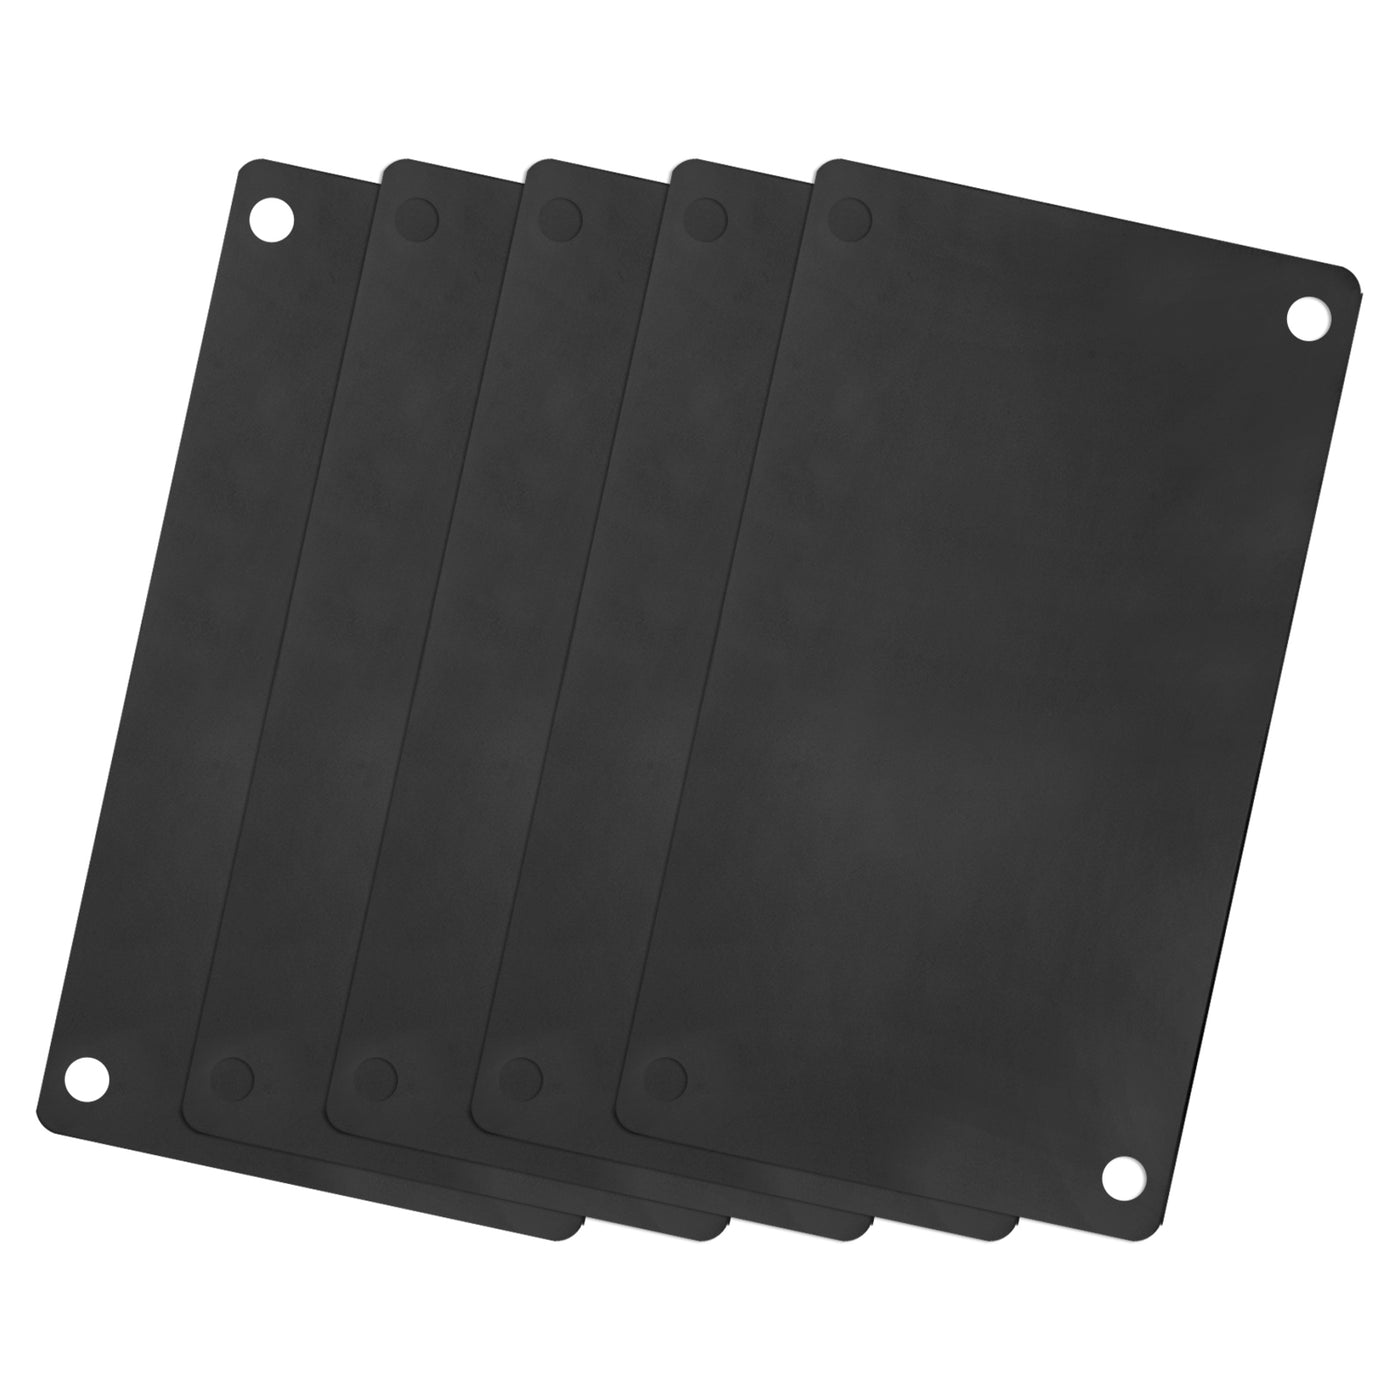 uxcell Uxcell 60x40mm Stainless Steel Blank Tags Engraving Blanks with 4 Hole, 5Pcs (Black)